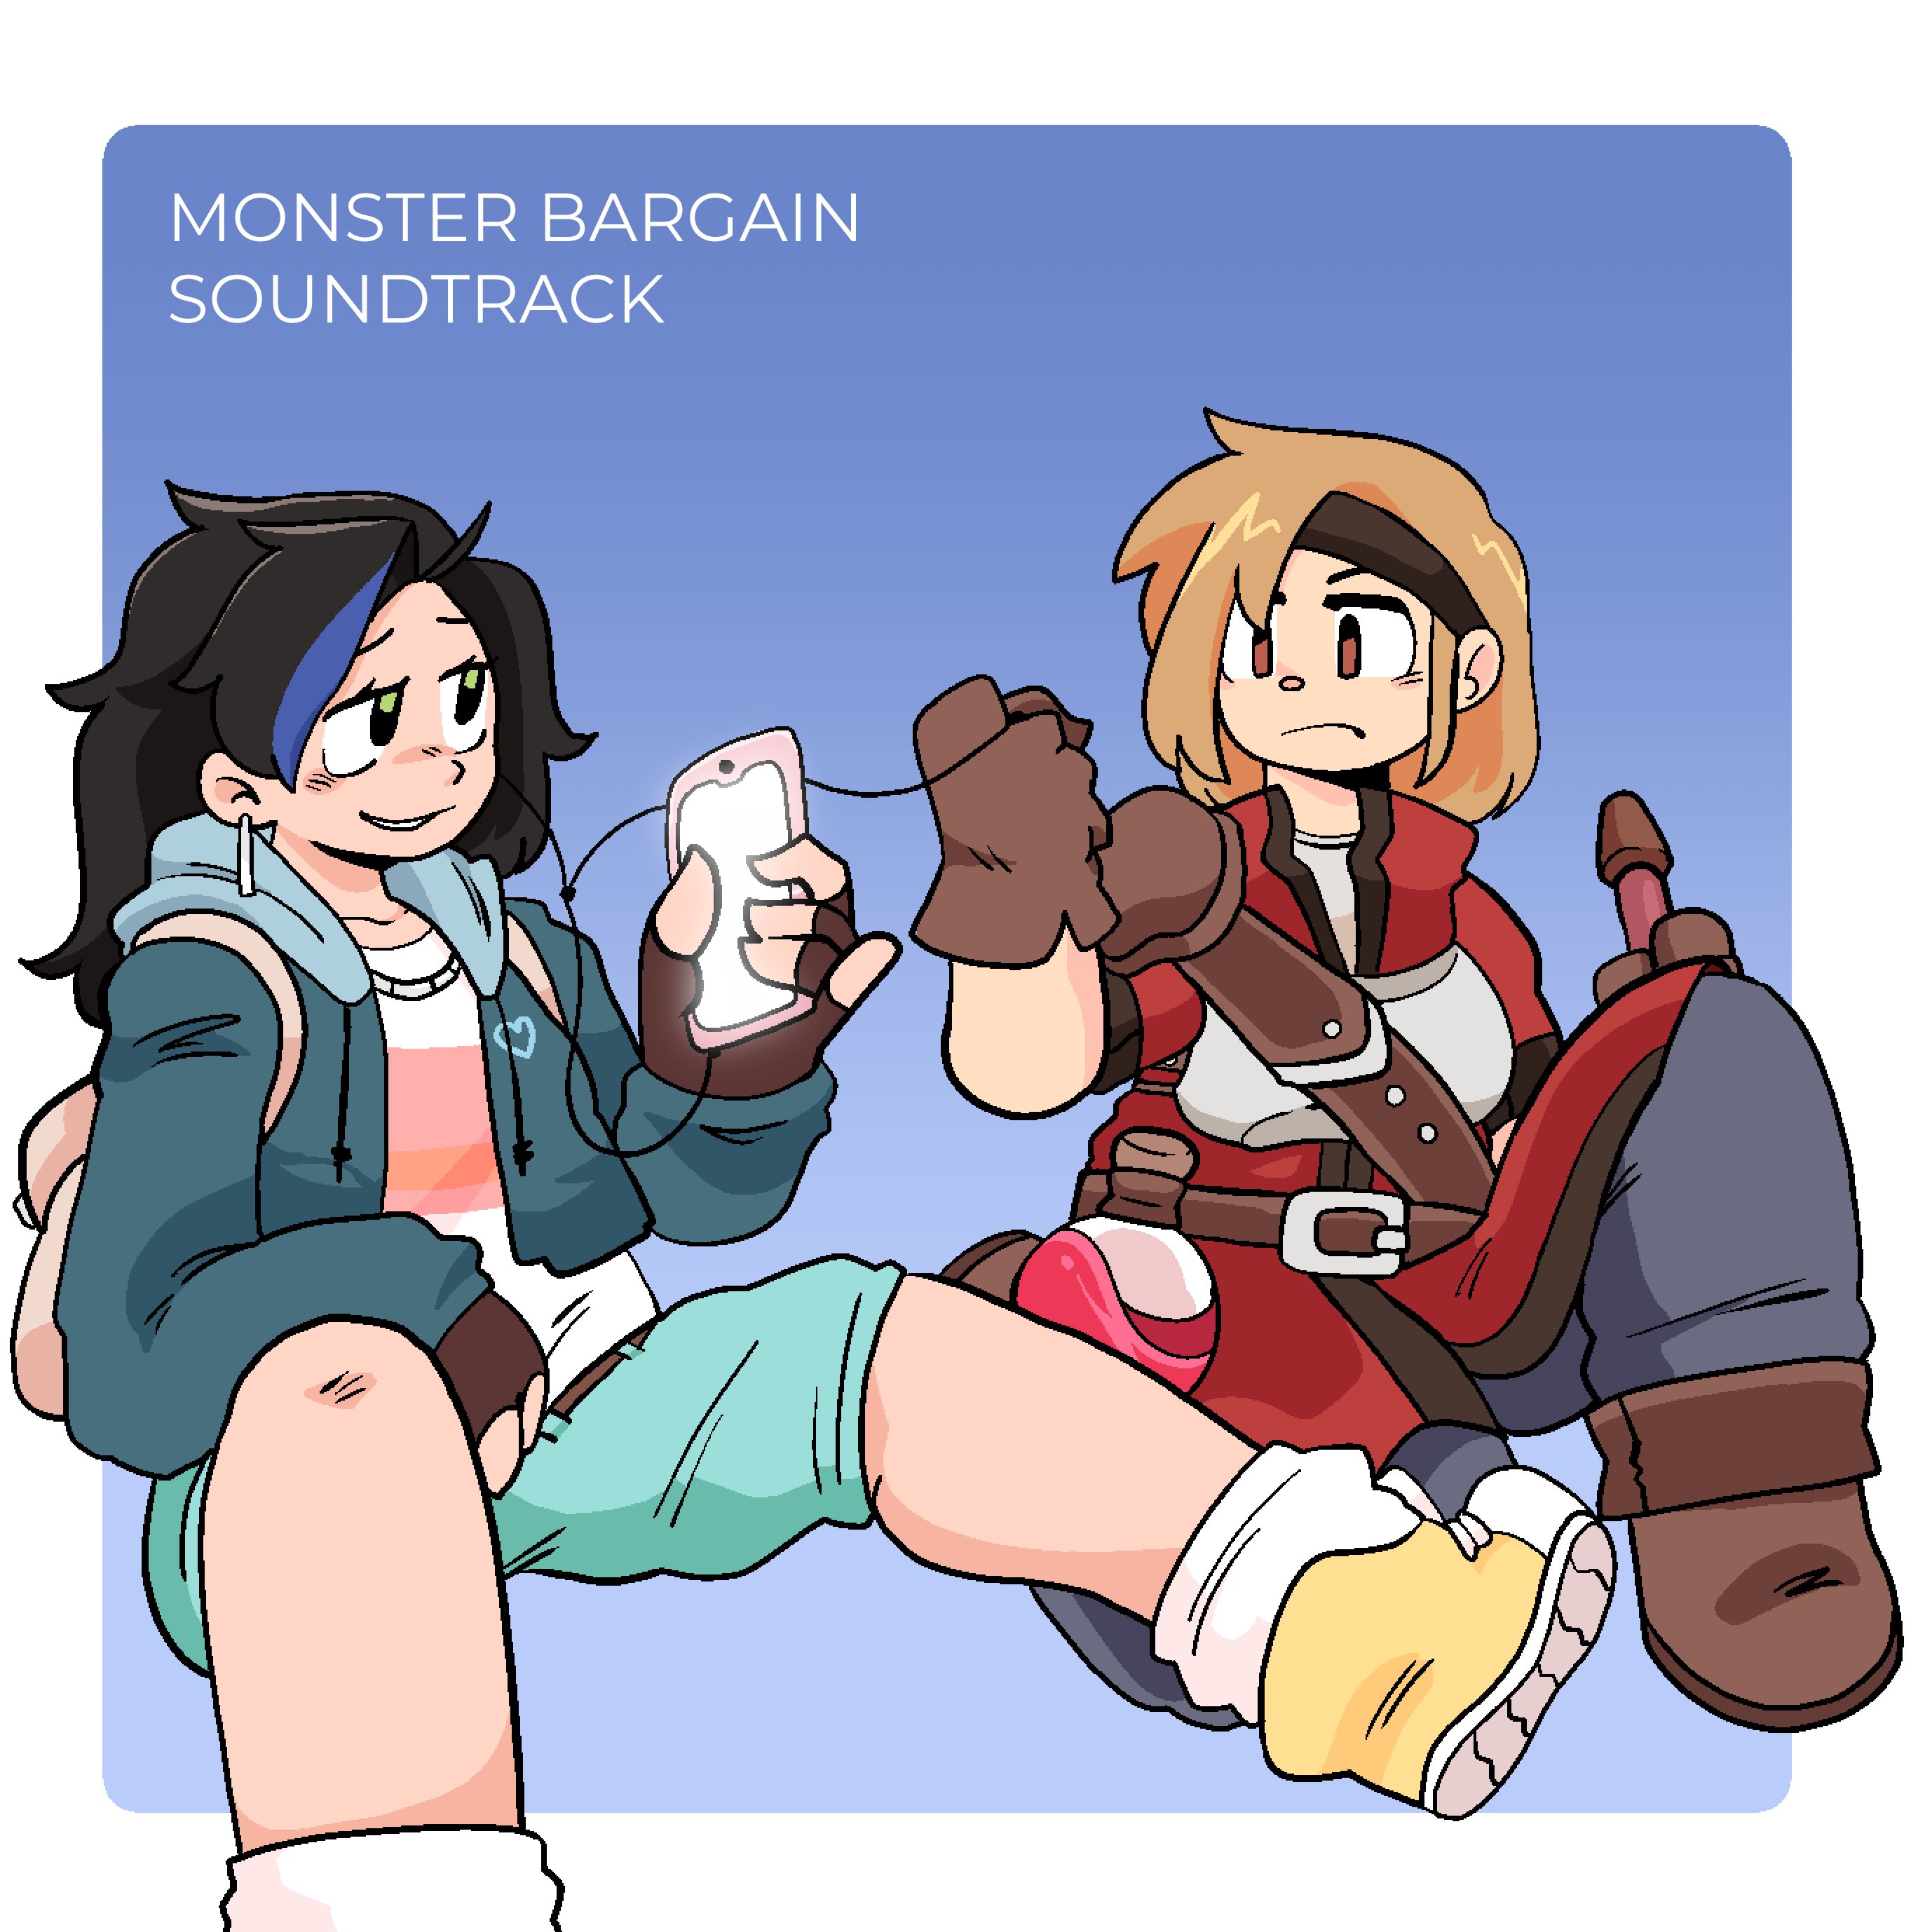 The modern hero from Monster Bargain is sharing her earphones with the fantasy hero. They are listening to music together.